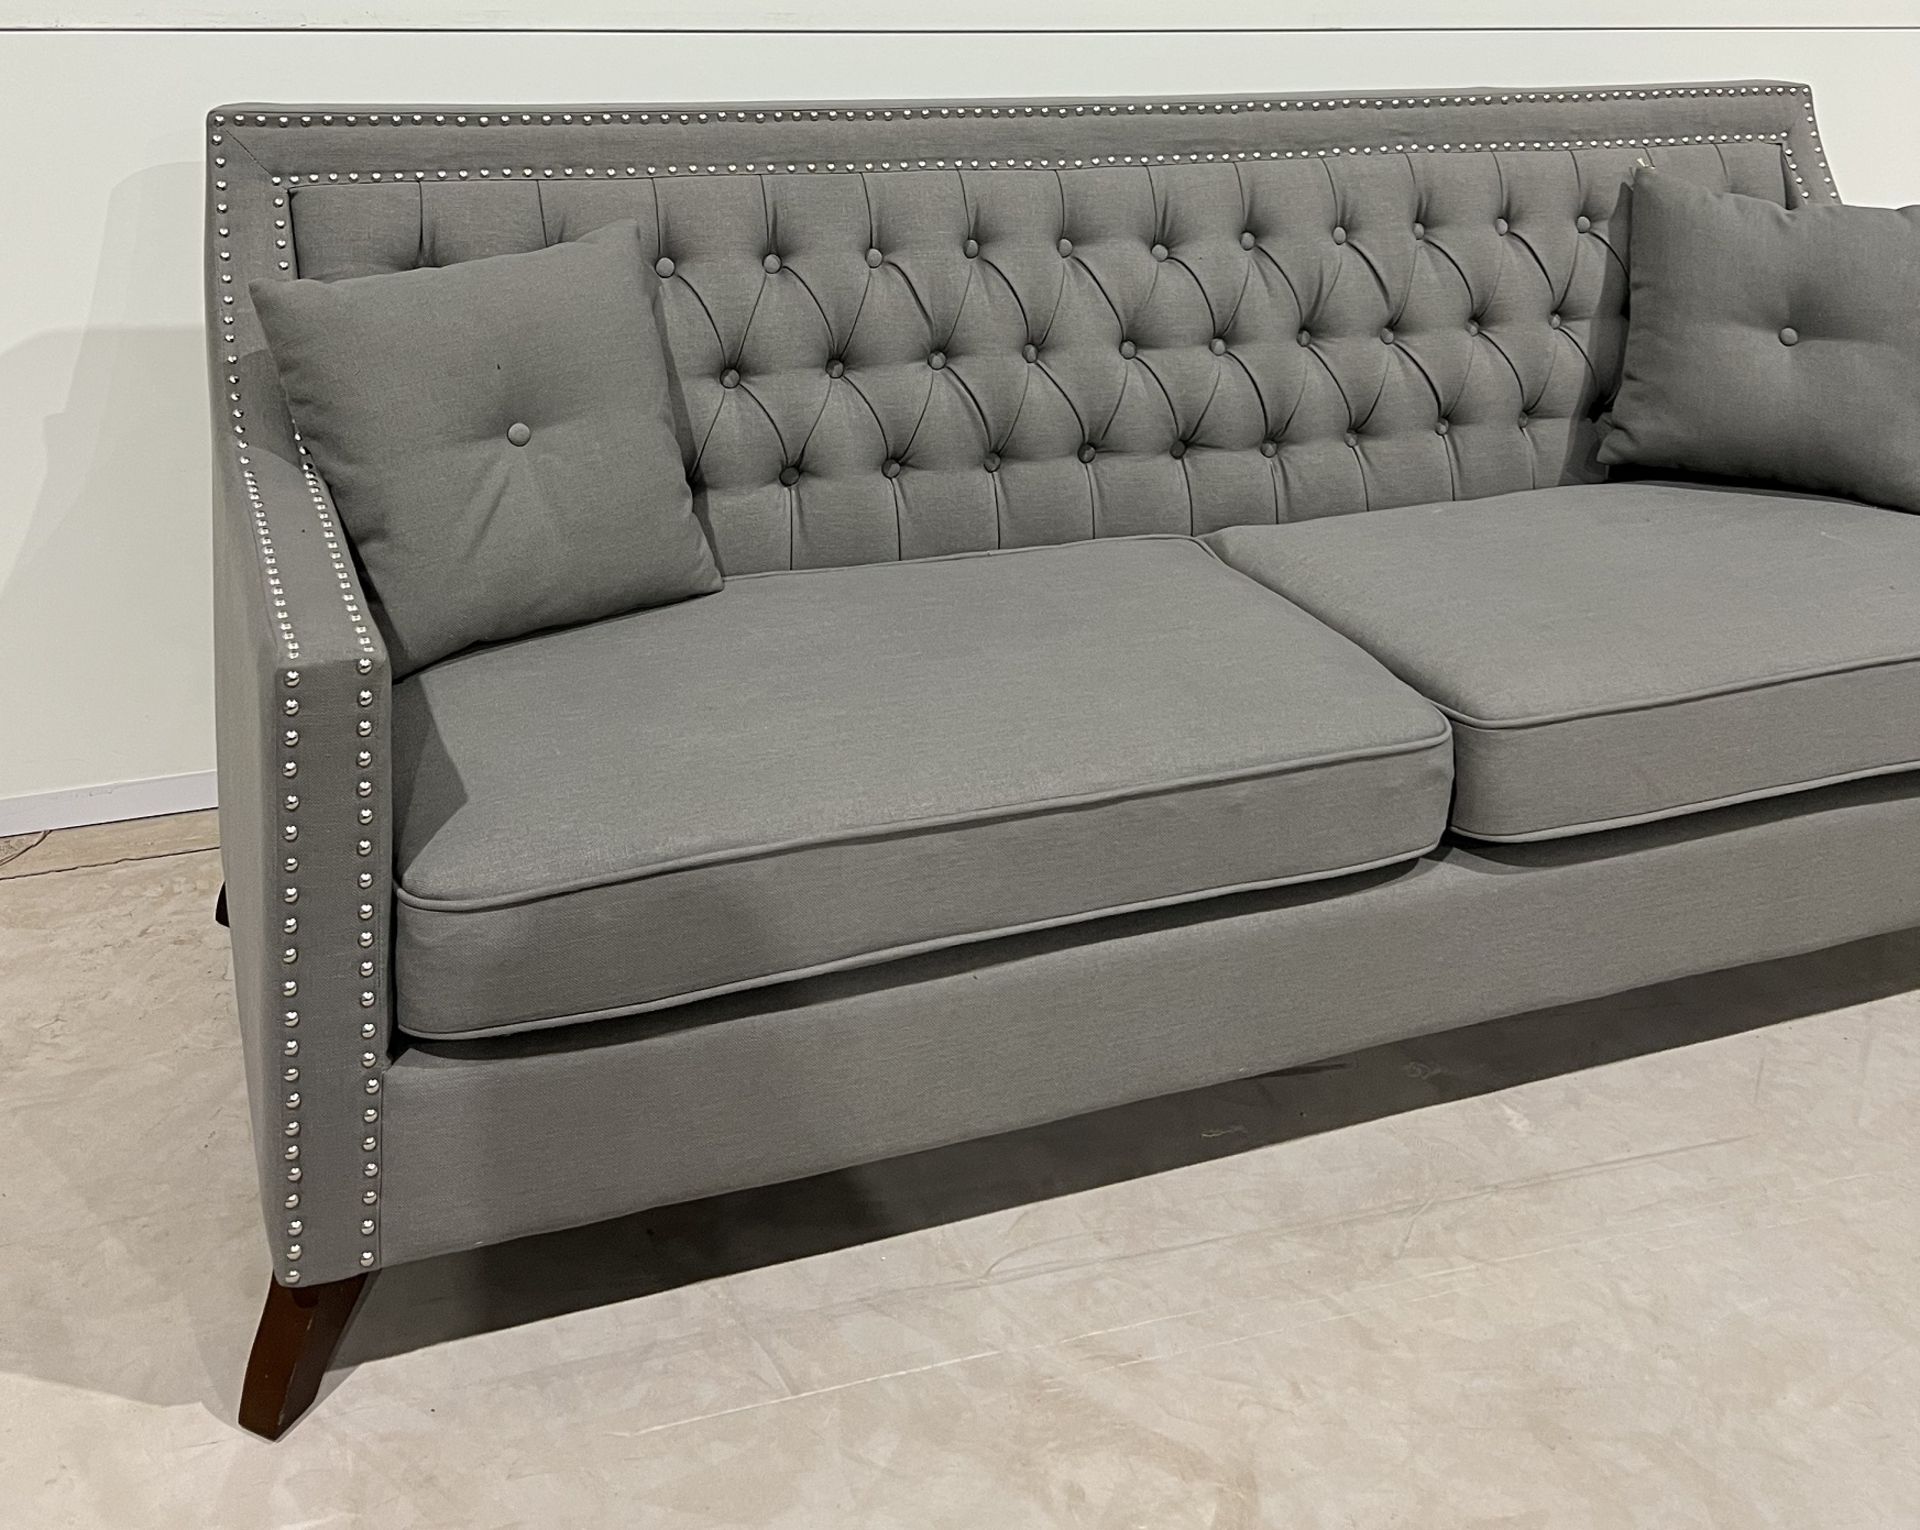 Chatsworth Grey Plush Fabric Sofa Offering A Decidedly Modern Take On The Classic Chesterfield - Image 3 of 3